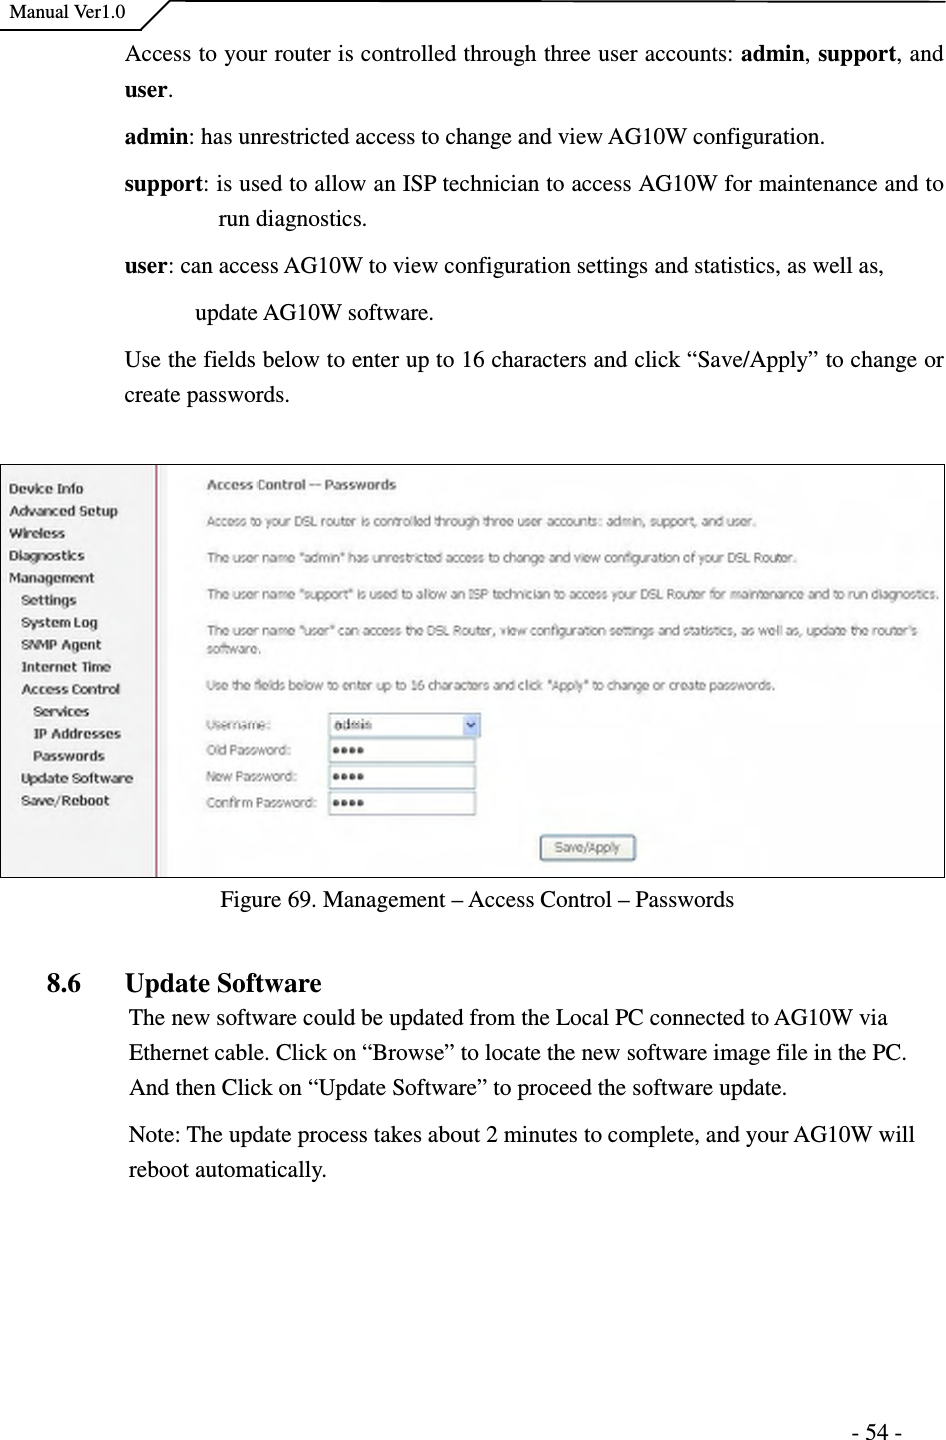    Manual Ver1.0                                                                      - 54 - Access to your router is controlled through three user accounts: admin, support, and user.   admin: has unrestricted access to change and view AG10W configuration. support: is used to allow an ISP technician to access AG10W for maintenance and to run diagnostics. user: can access AG10W to view configuration settings and statistics, as well as,   update AG10W software. Use the fields below to enter up to 16 characters and click “Save/Apply” to change or create passwords.      Figure 69. Management – Access Control – Passwords  8.6 Update Software The new software could be updated from the Local PC connected to AG10W via Ethernet cable. Click on “Browse” to locate the new software image file in the PC. And then Click on “Update Software” to proceed the software update.   Note: The update process takes about 2 minutes to complete, and your AG10W will reboot automatically.  